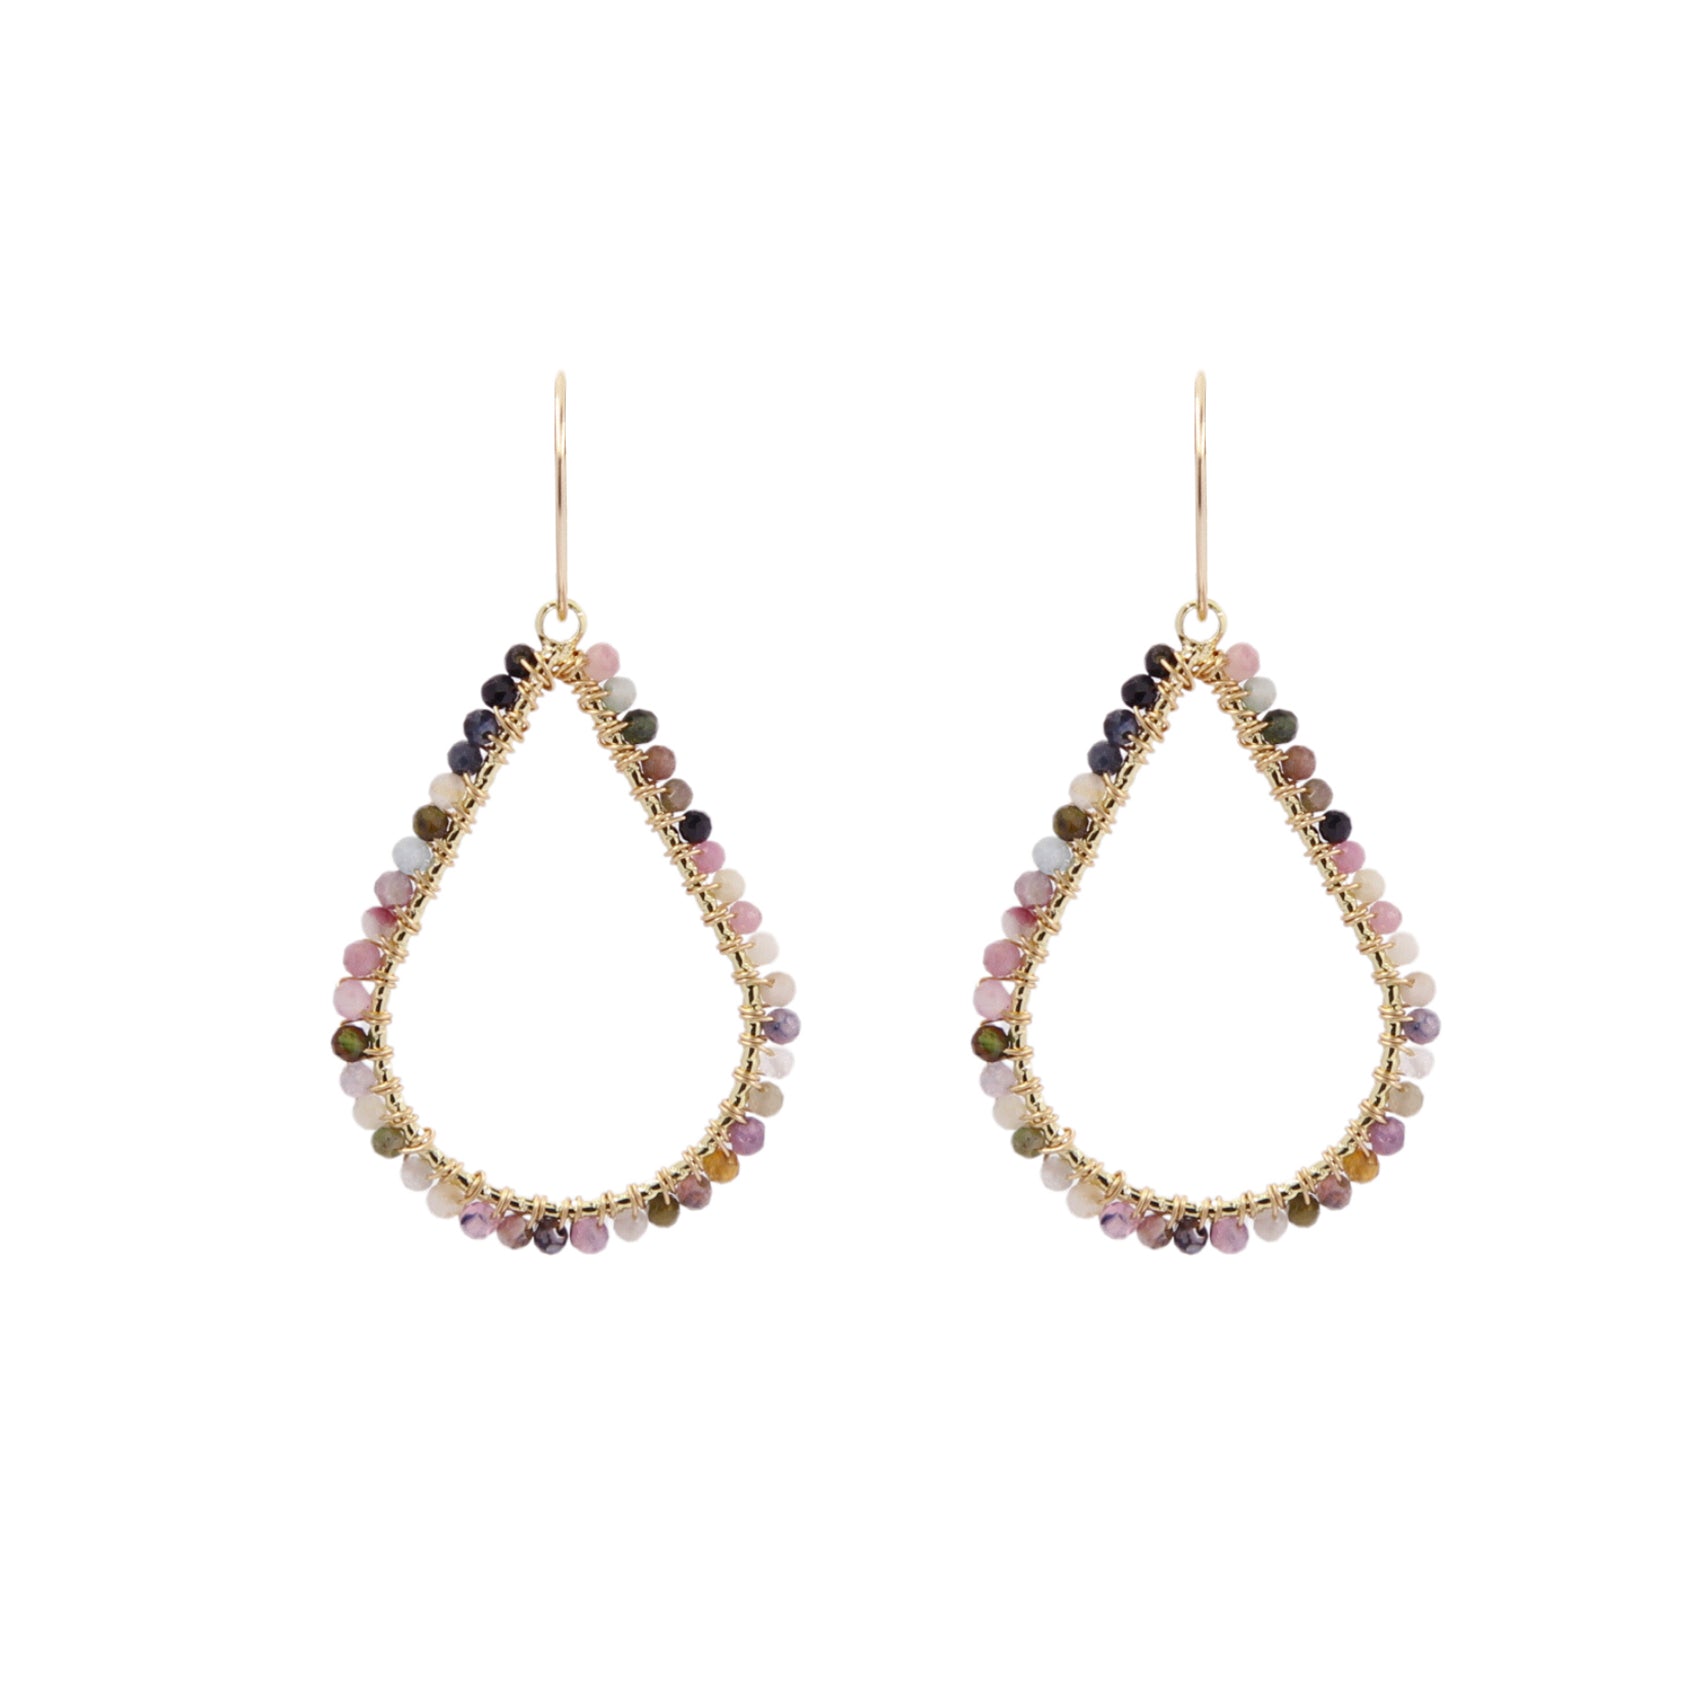 CHIYO Beaded Drop Earrings 28mm by Gosia Orlowska - Exquisite Style